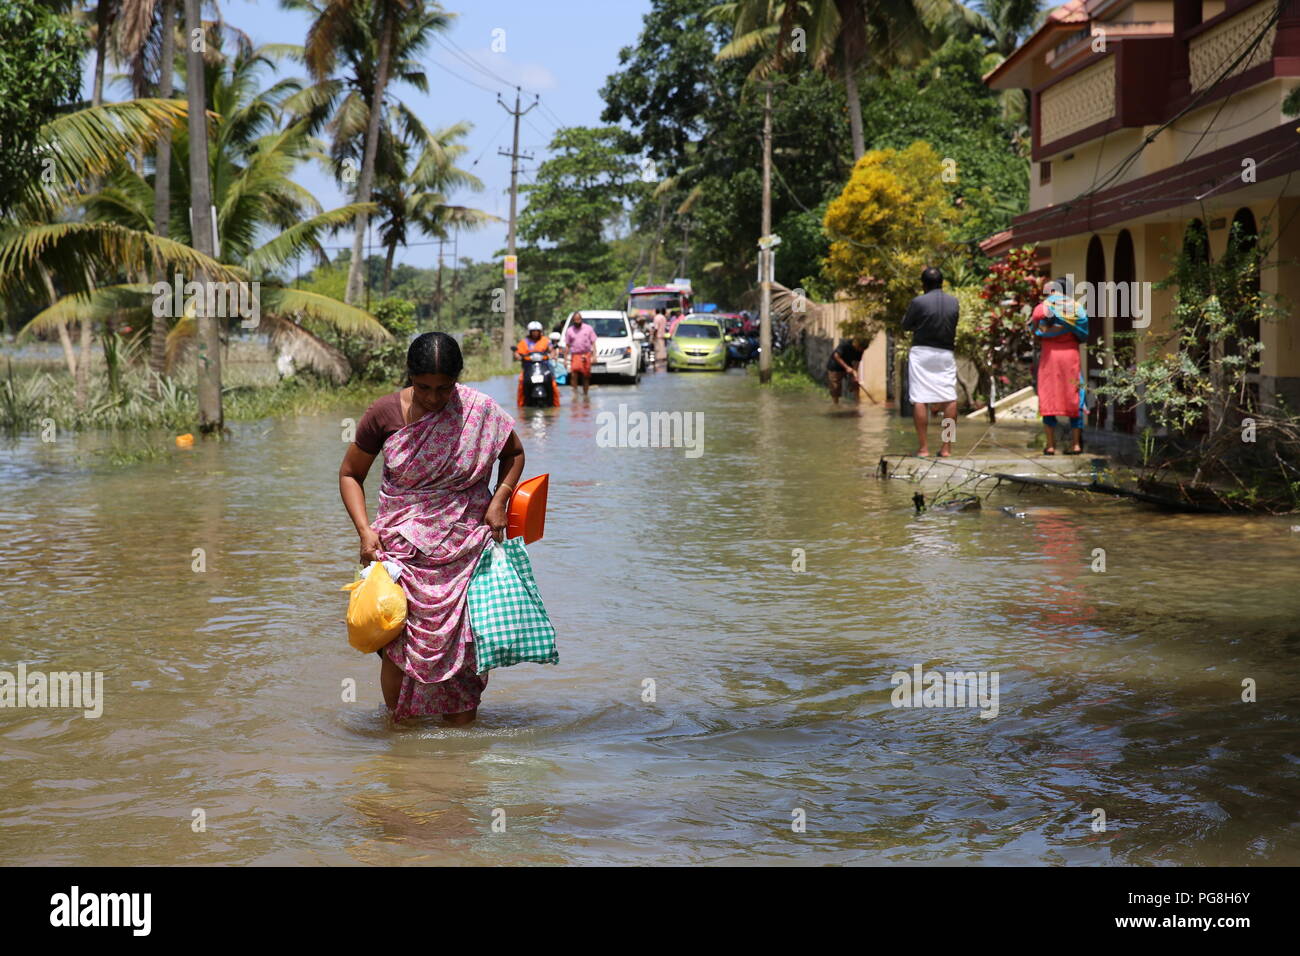 Kerala. 22nd Aug, 2018. People wade through flood water in India's southernmost flood-hit Kerala state, Aug. 22, 2018. According to media reports, the death toll in the devastating floods has reached 370. Credit: Zhao Xu/Xinhua/Alamy Live News Stock Photo